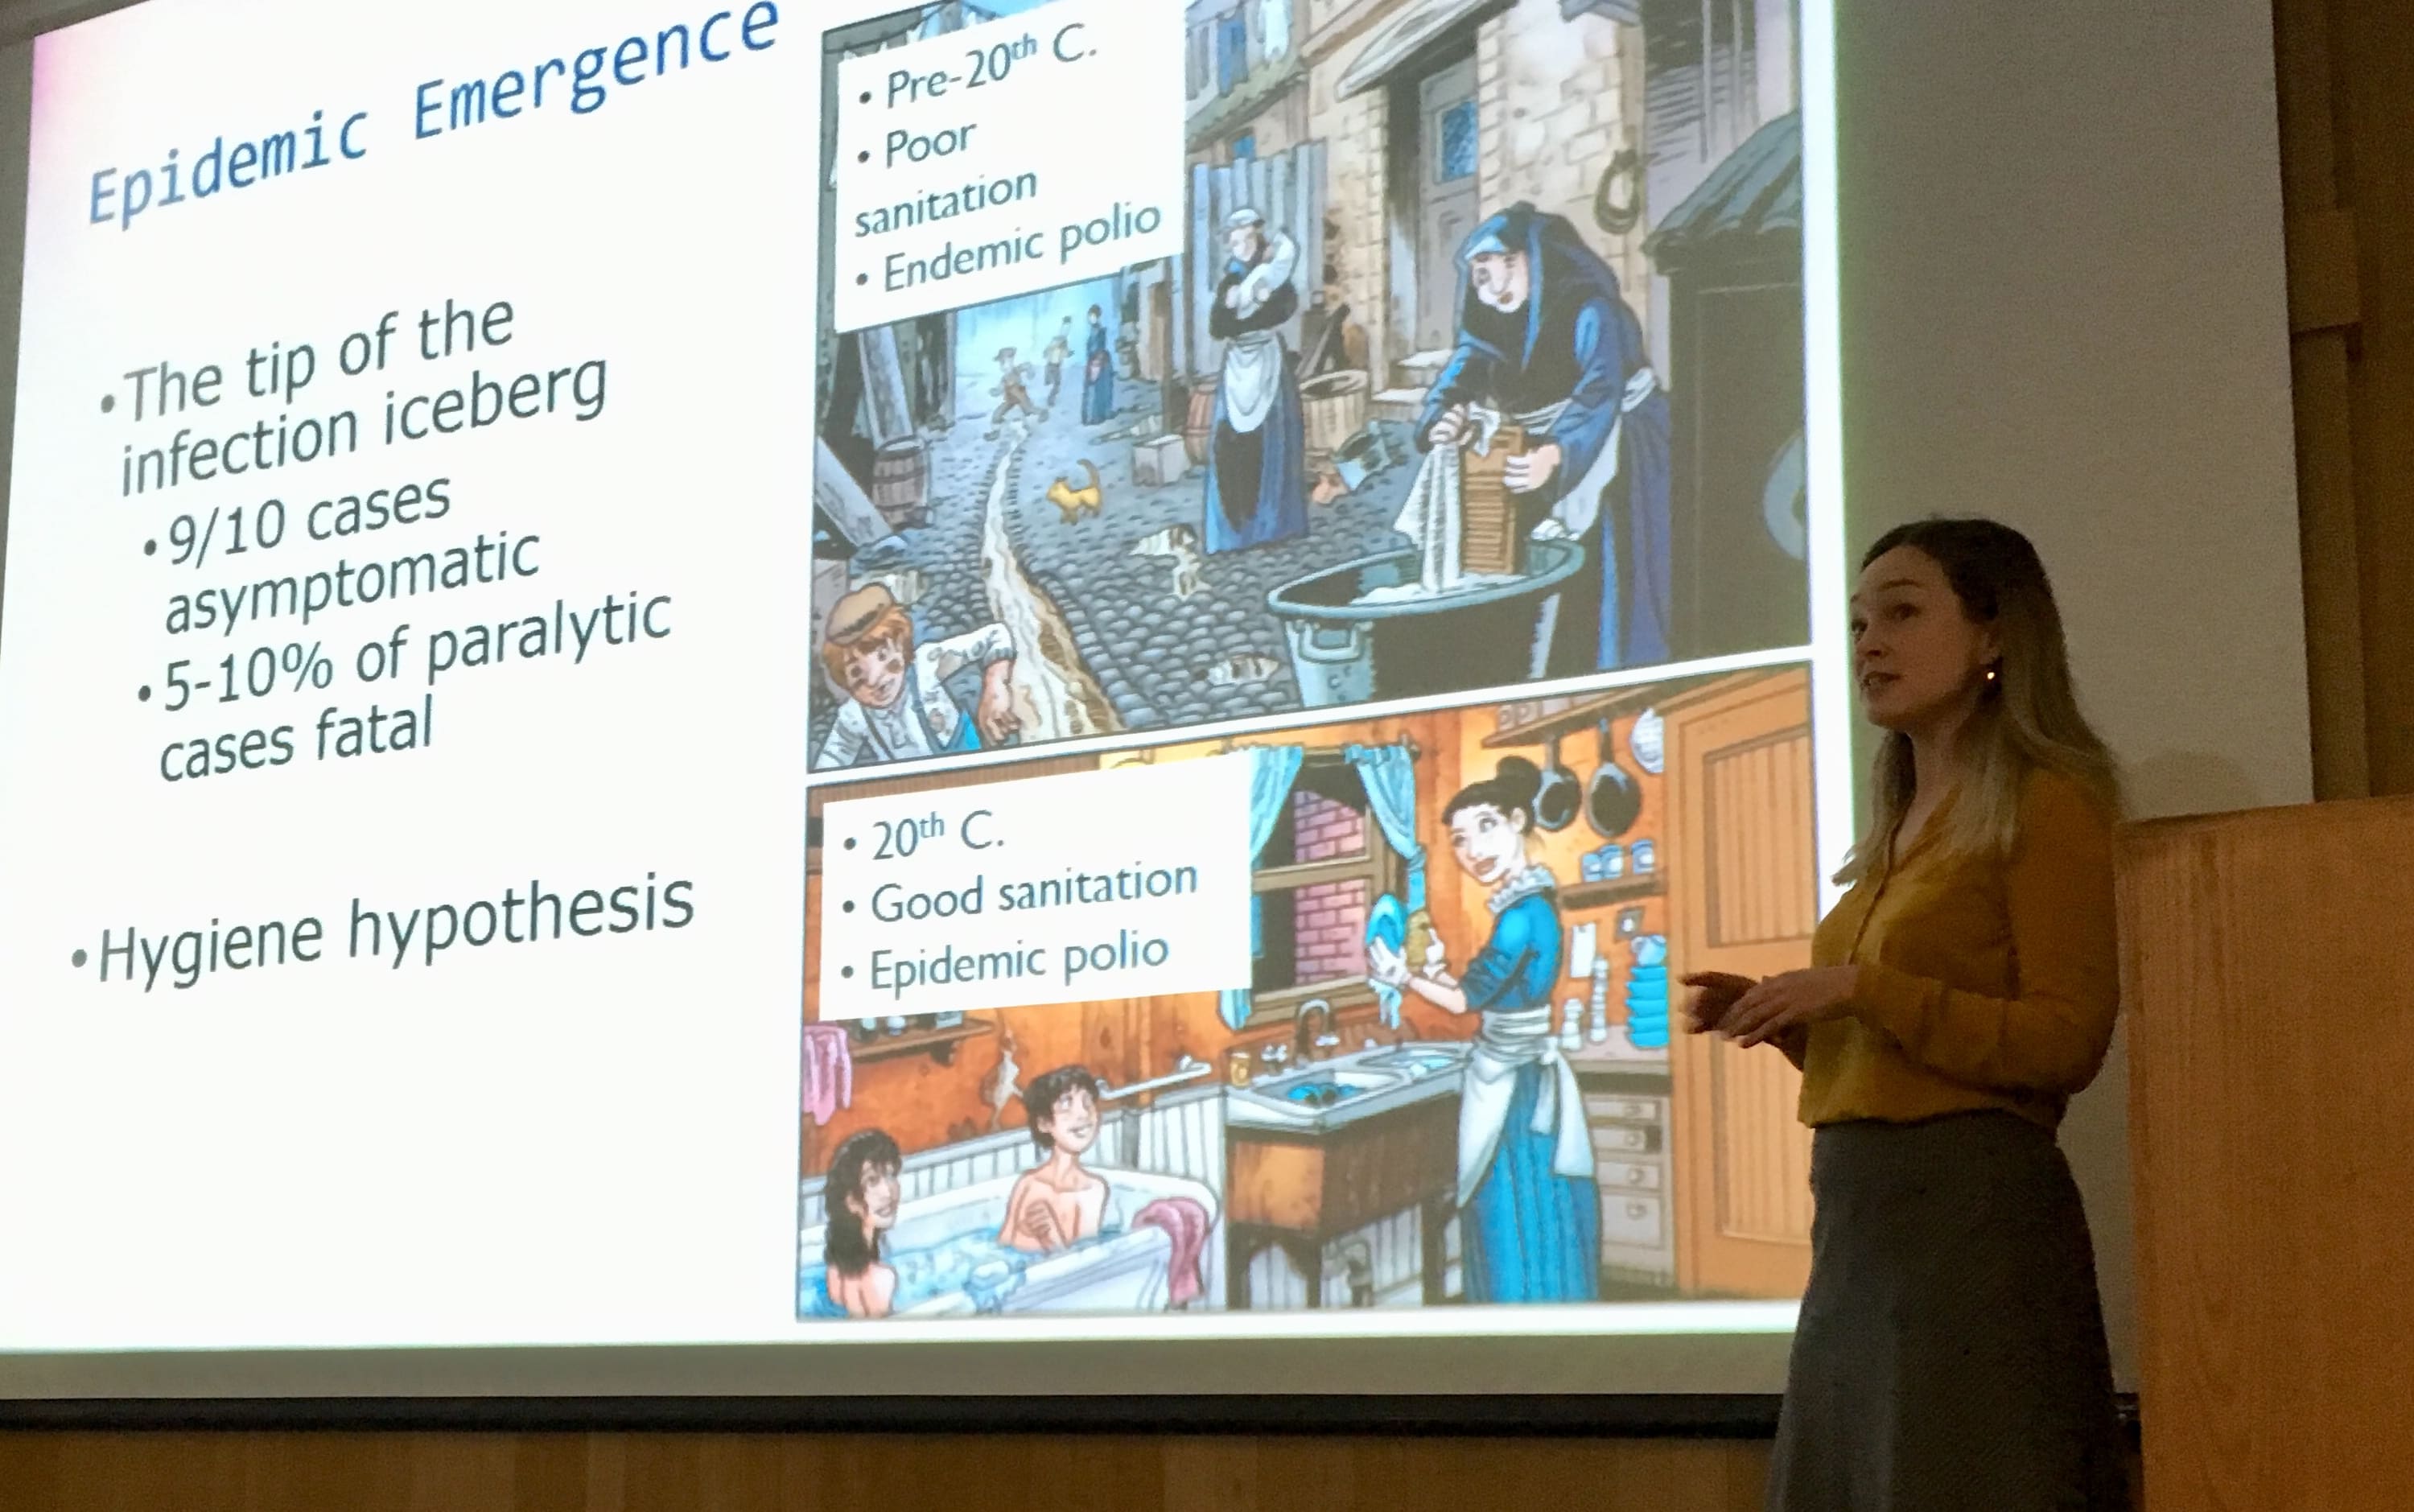 Dr Heather Battles giving a lecture on the 1916 polio epidemic in New Zealand at the University of Alaska Anchorage in 2018.